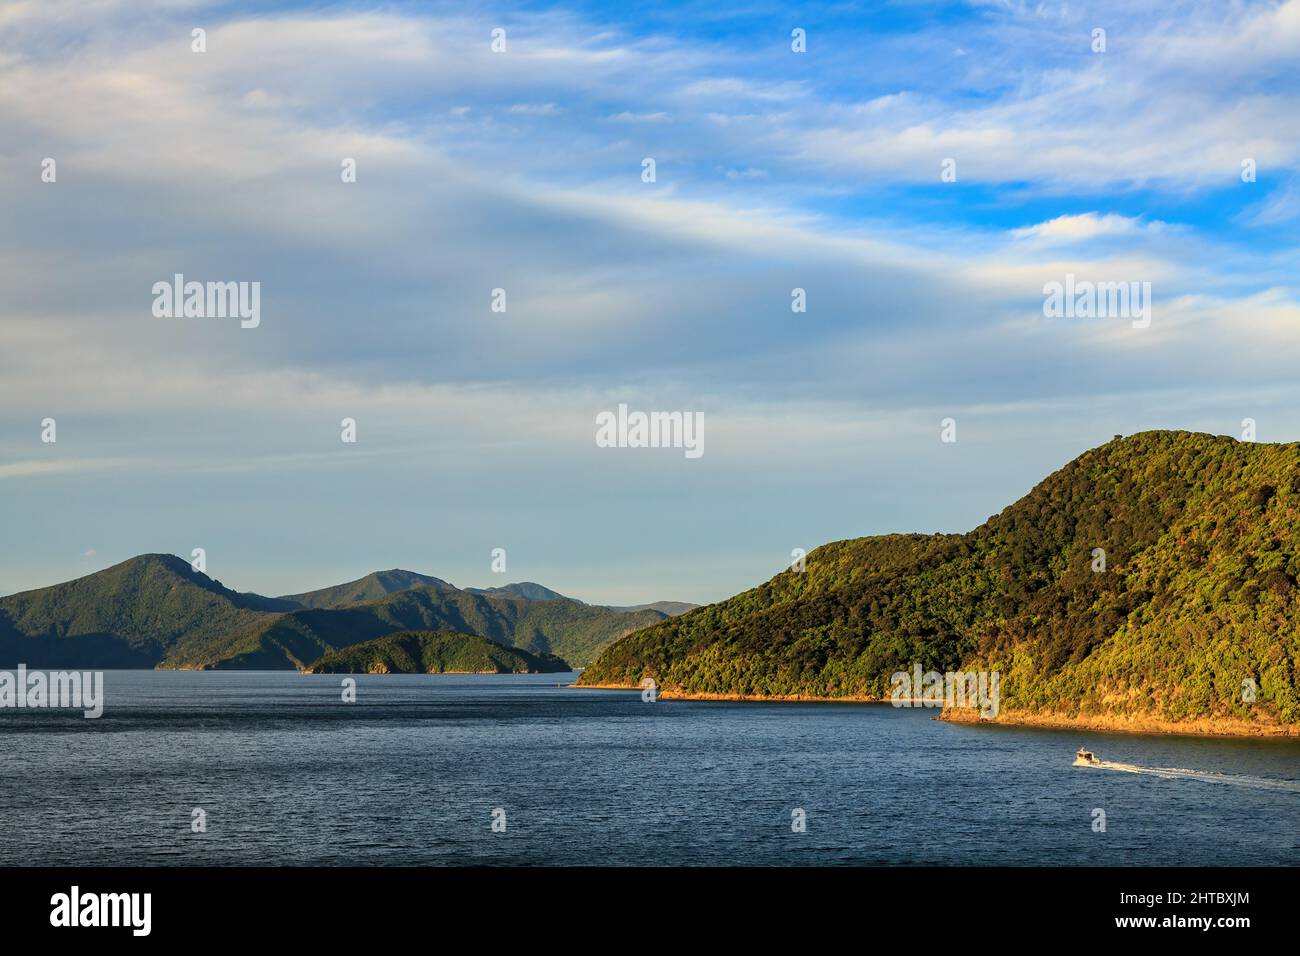 Queen Charlotte Sound, one of the Marlborough Sounds, a group of drowned valleys in the South Island of New Zealand Stock Photo